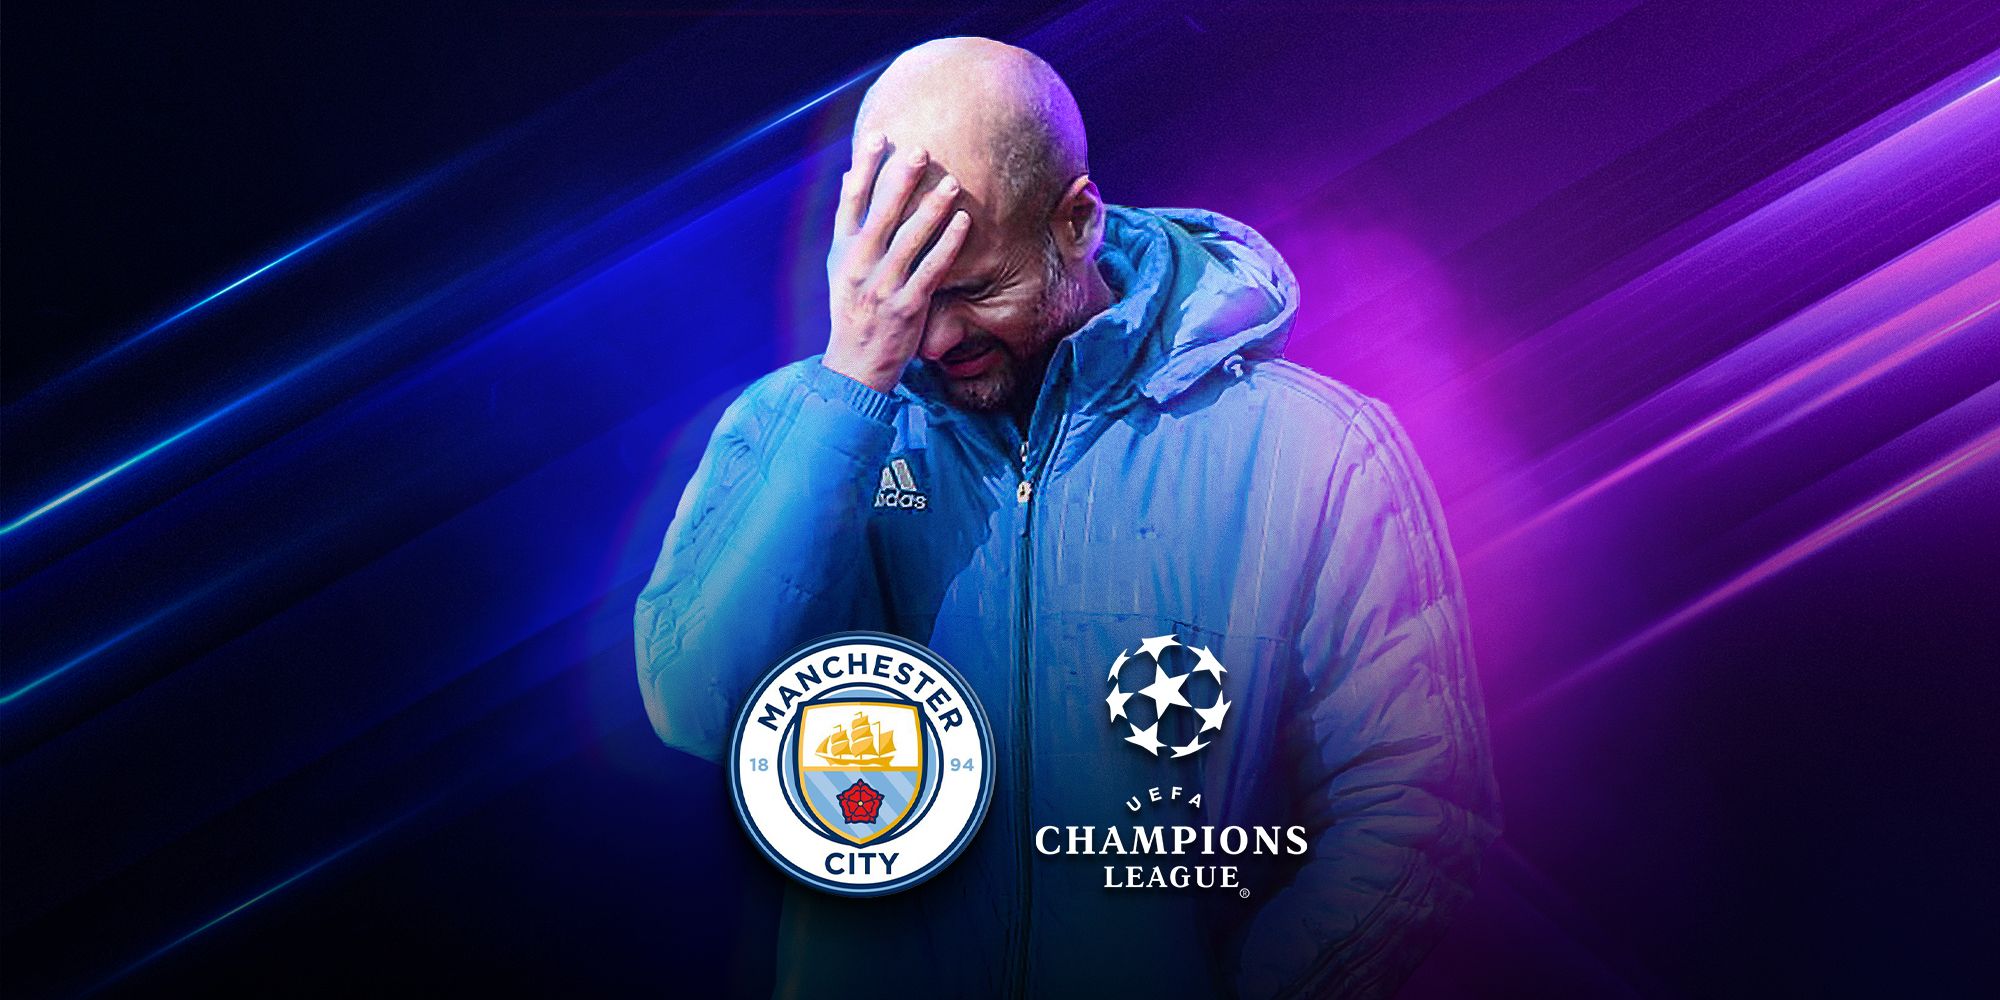 Man City manager Pep Guardiola with his head in his hand.